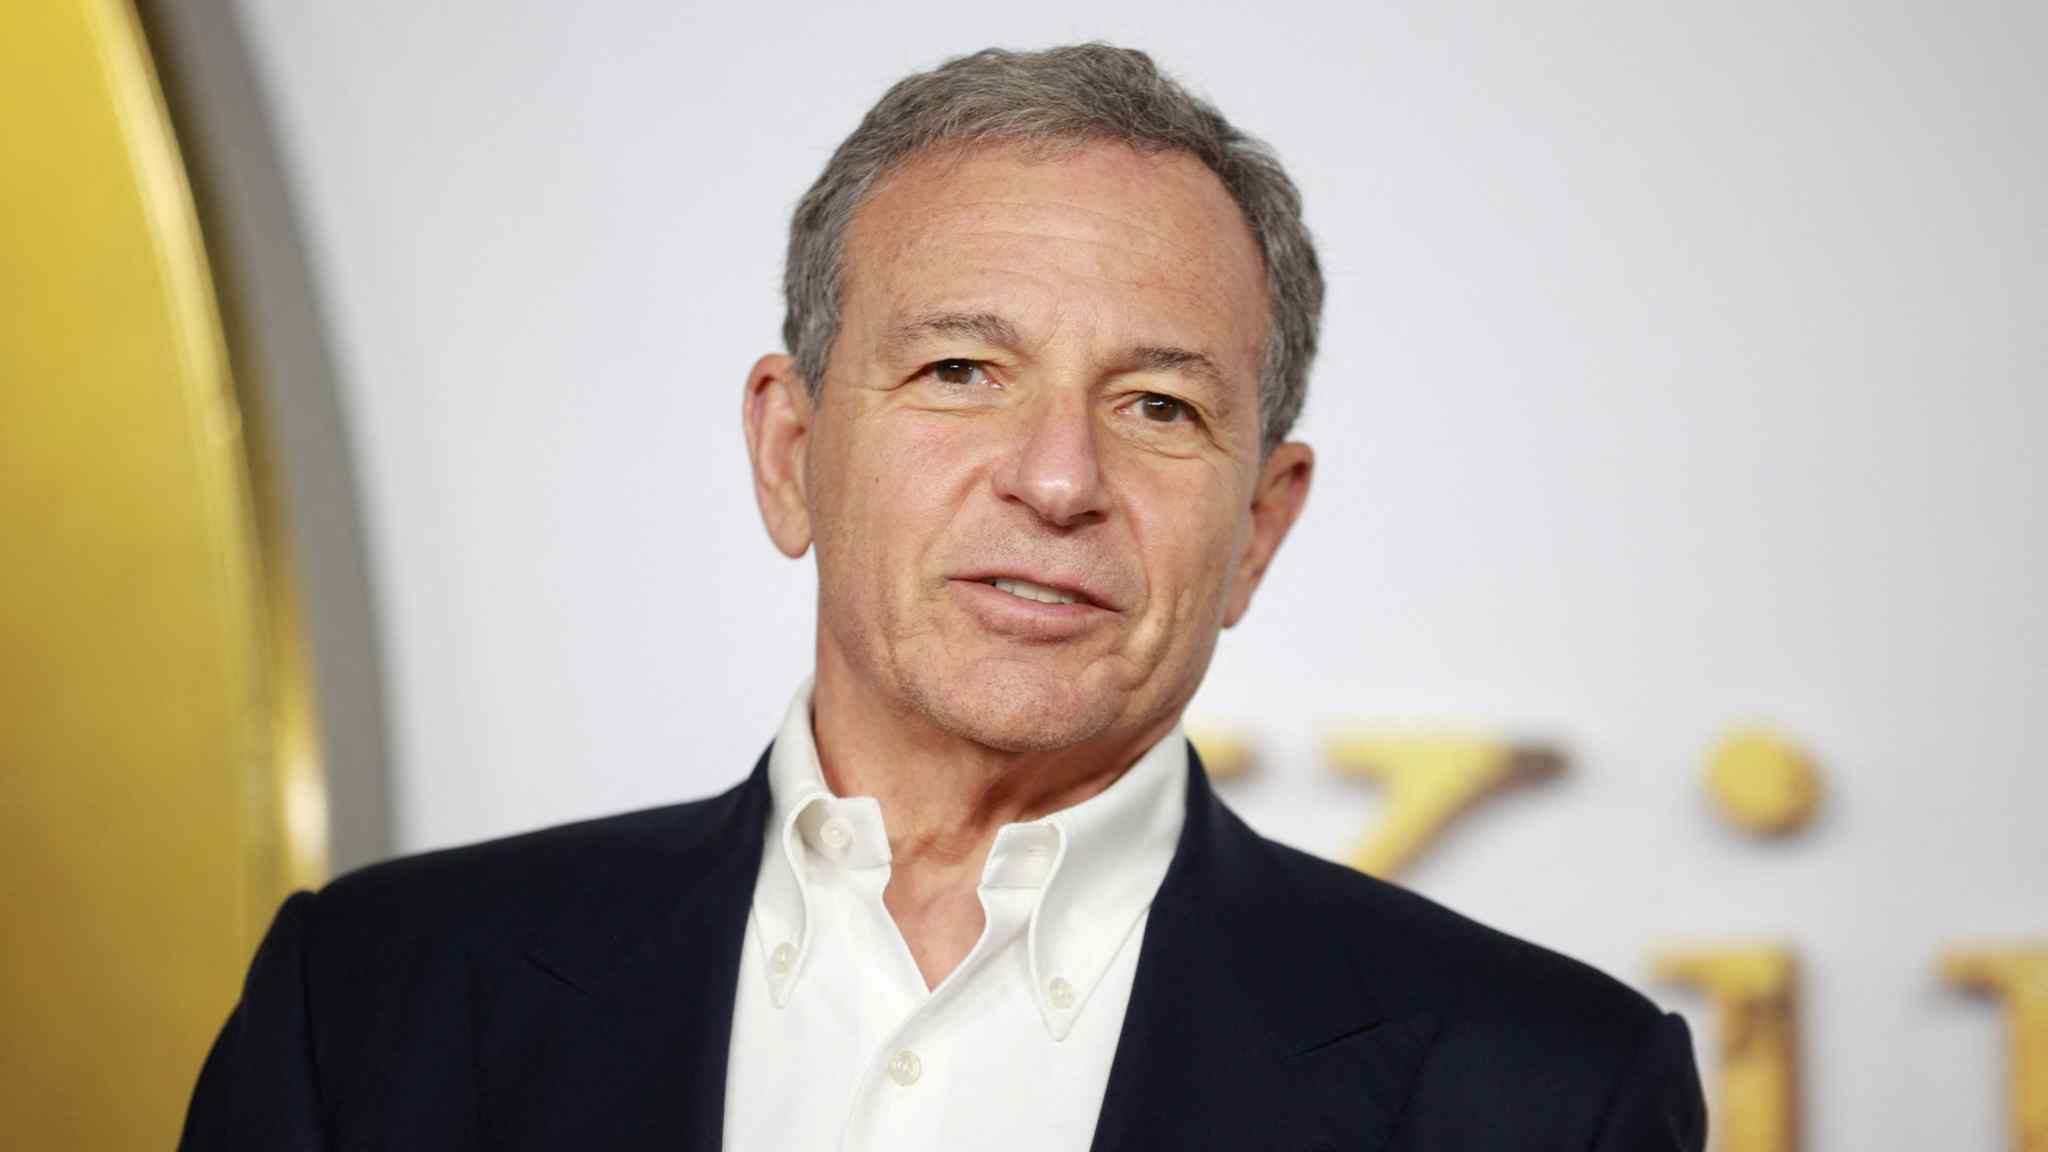 Disney’s Iger vows to take ‘hard look’ at costs in push for profit